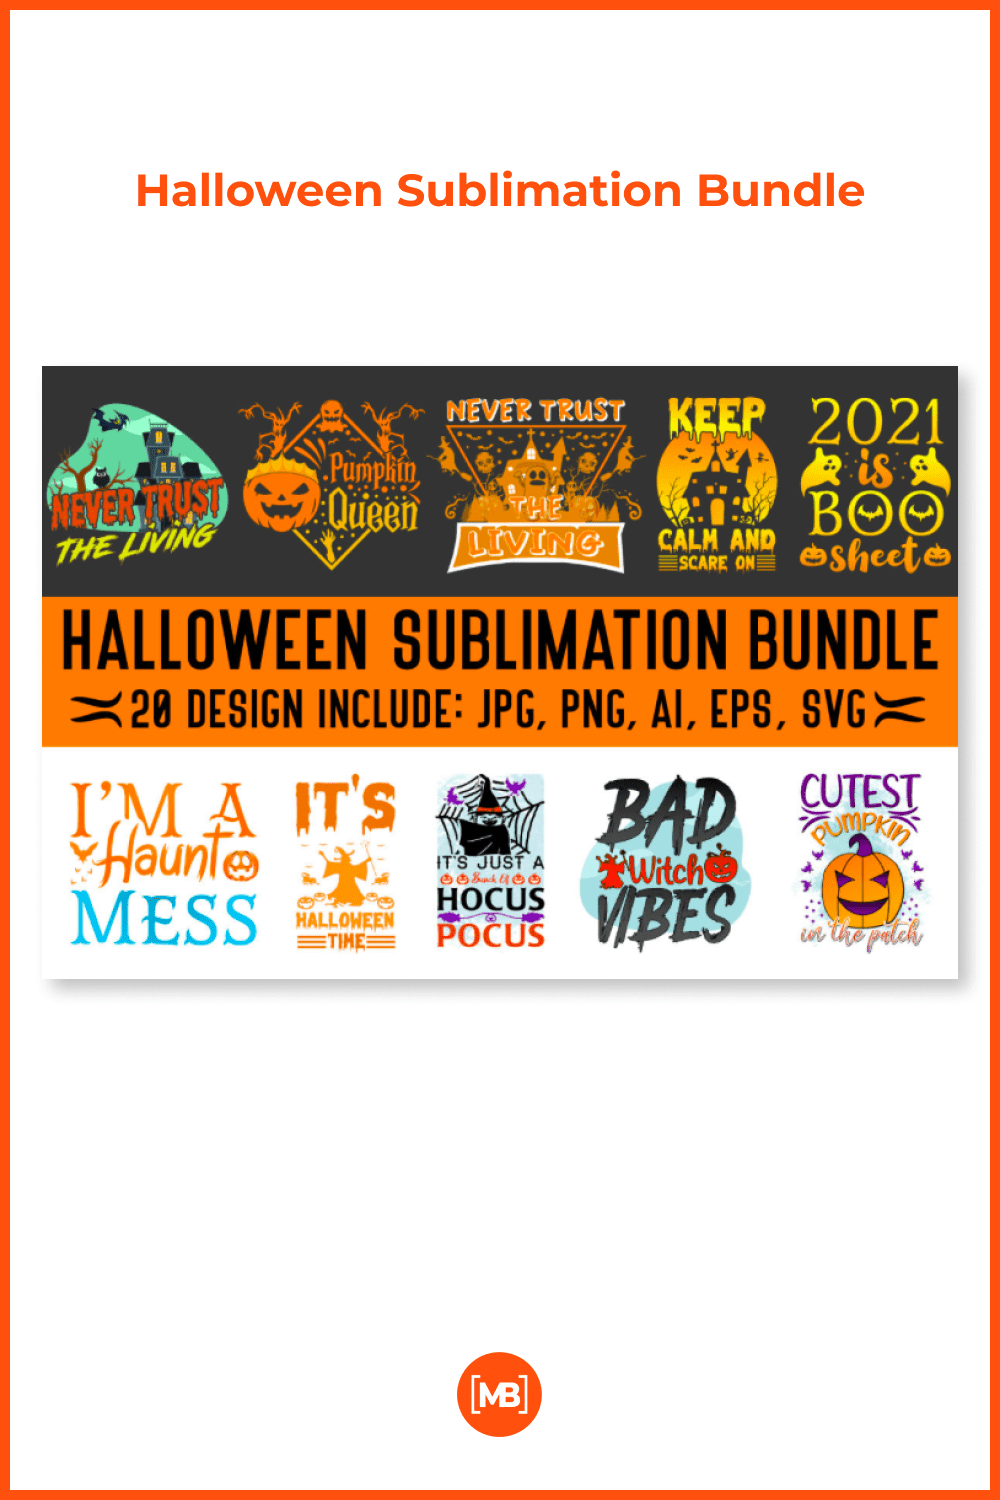 A pack of different illustrations, logos and fonts that are created for Halloween.